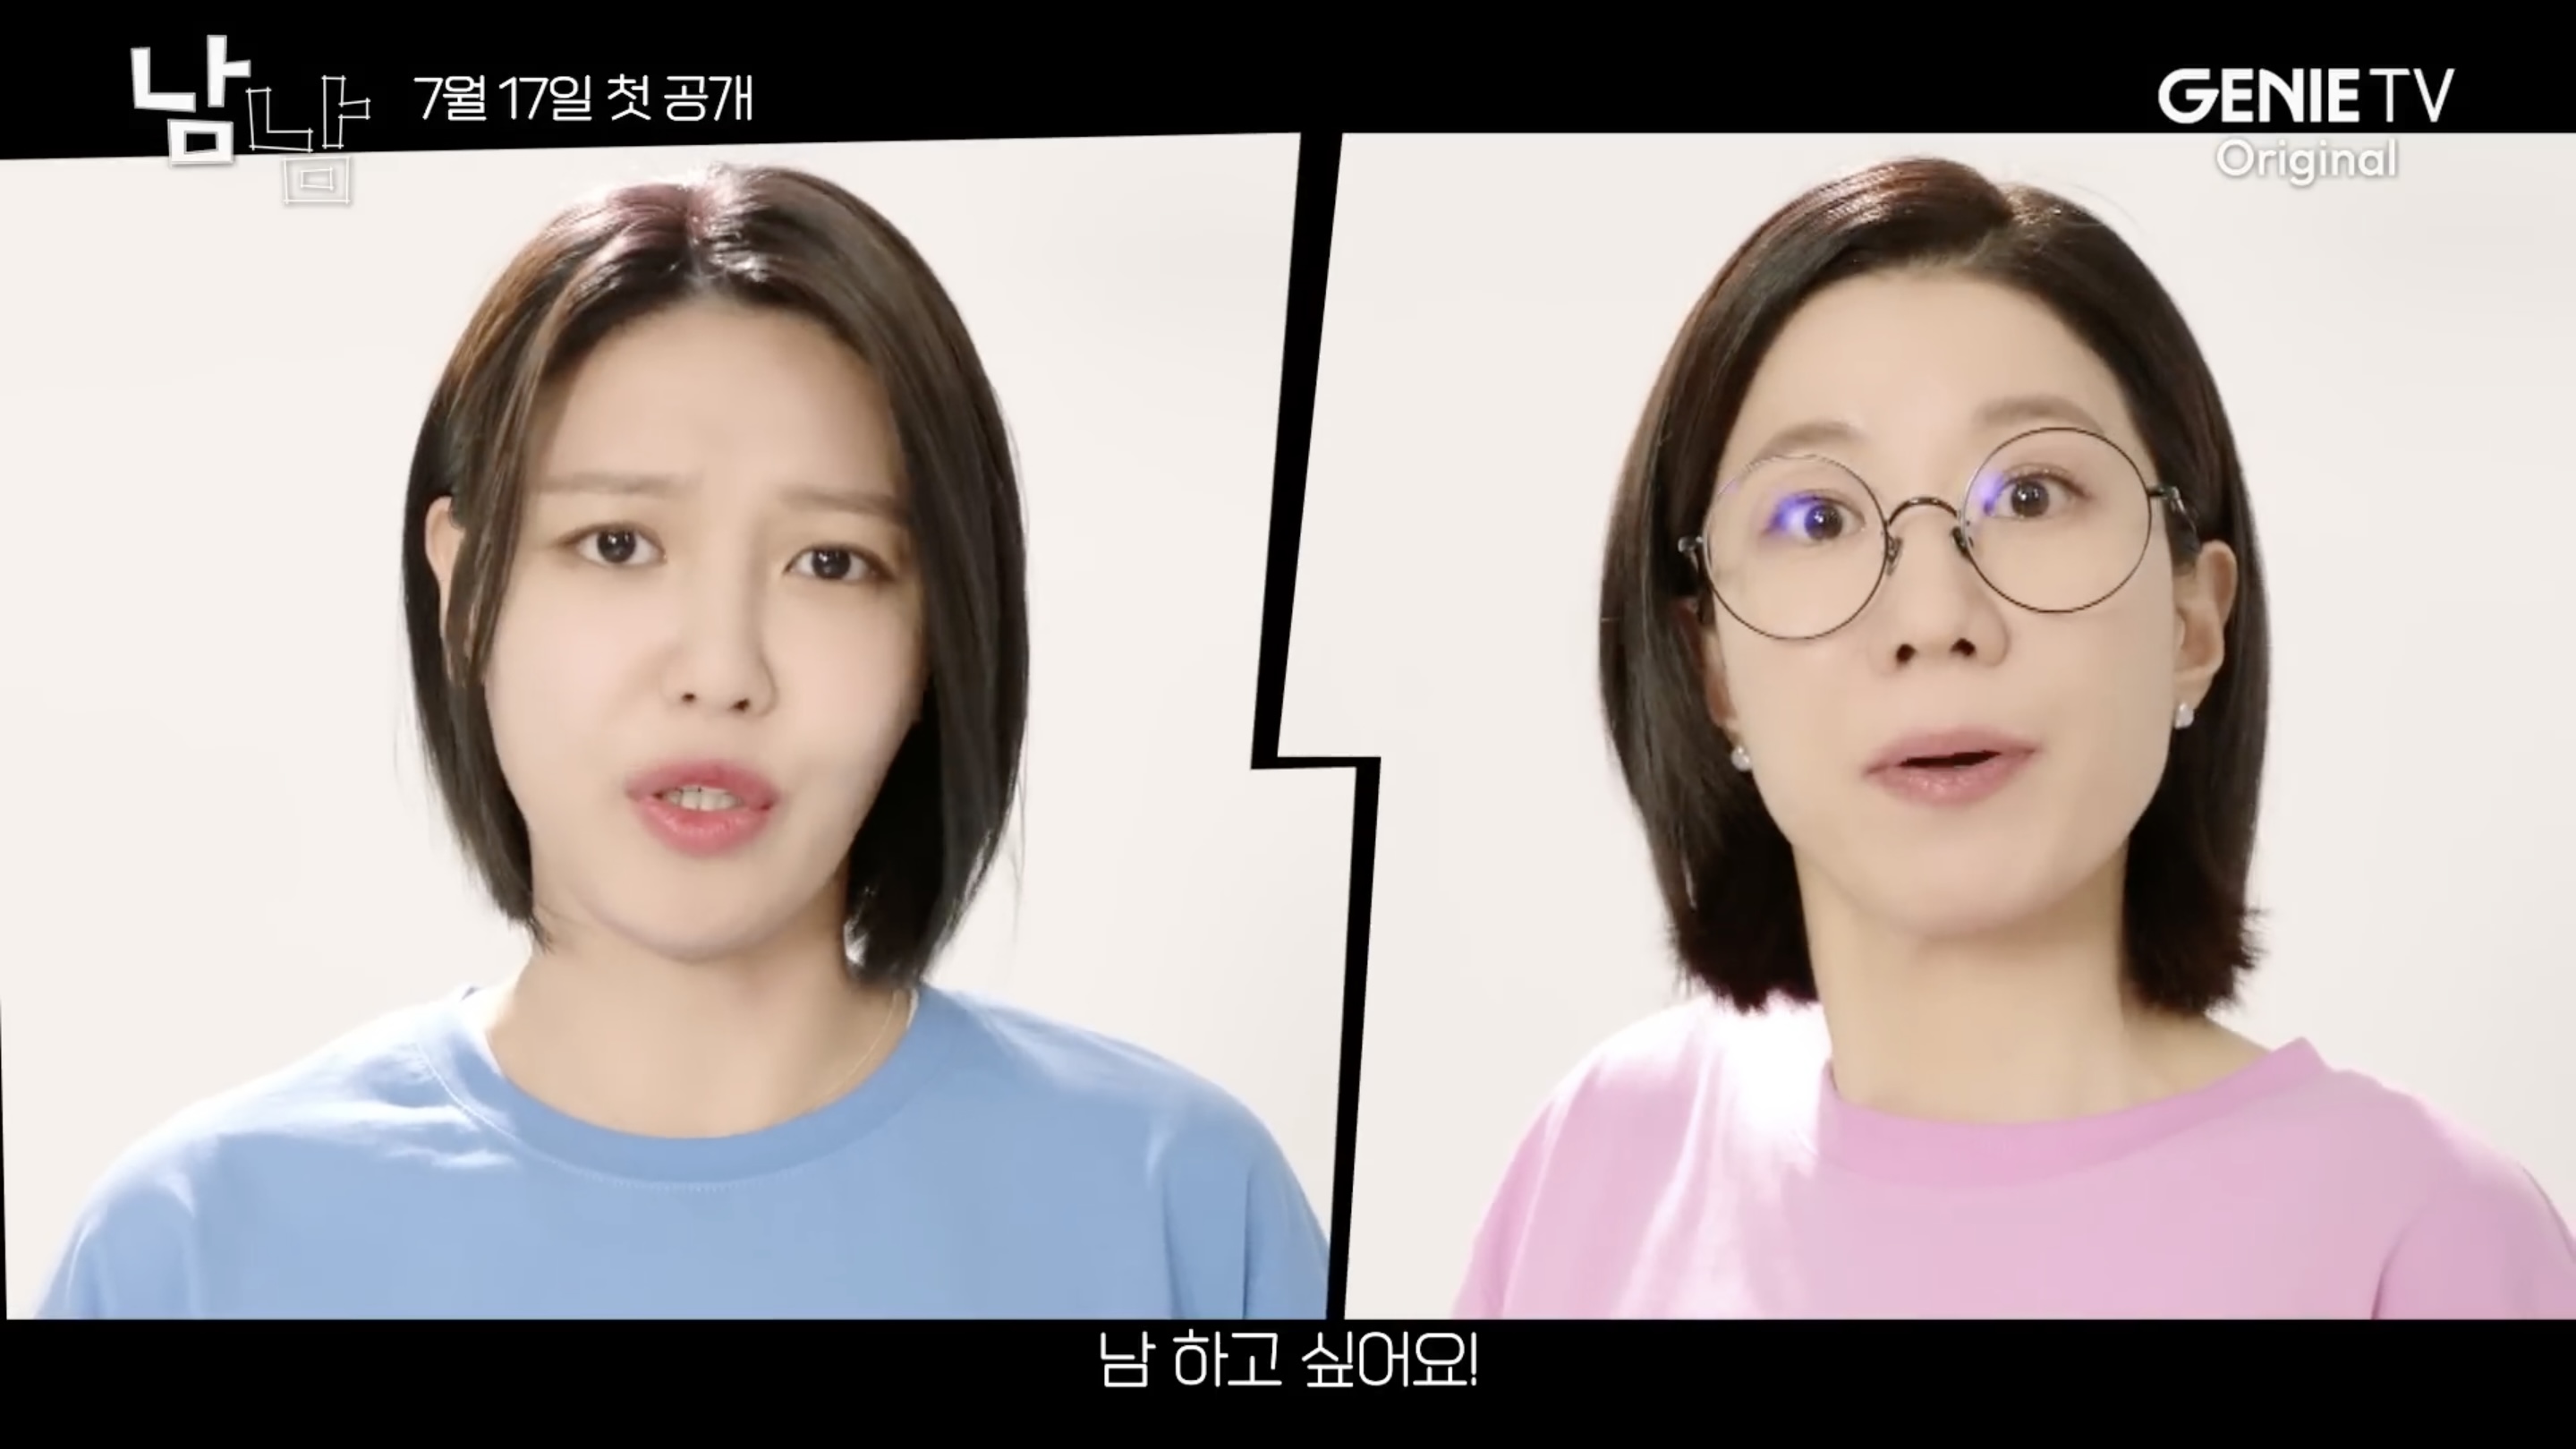 Jeon Hye-jin and Sooyoung are a chaotic duo in Not Others